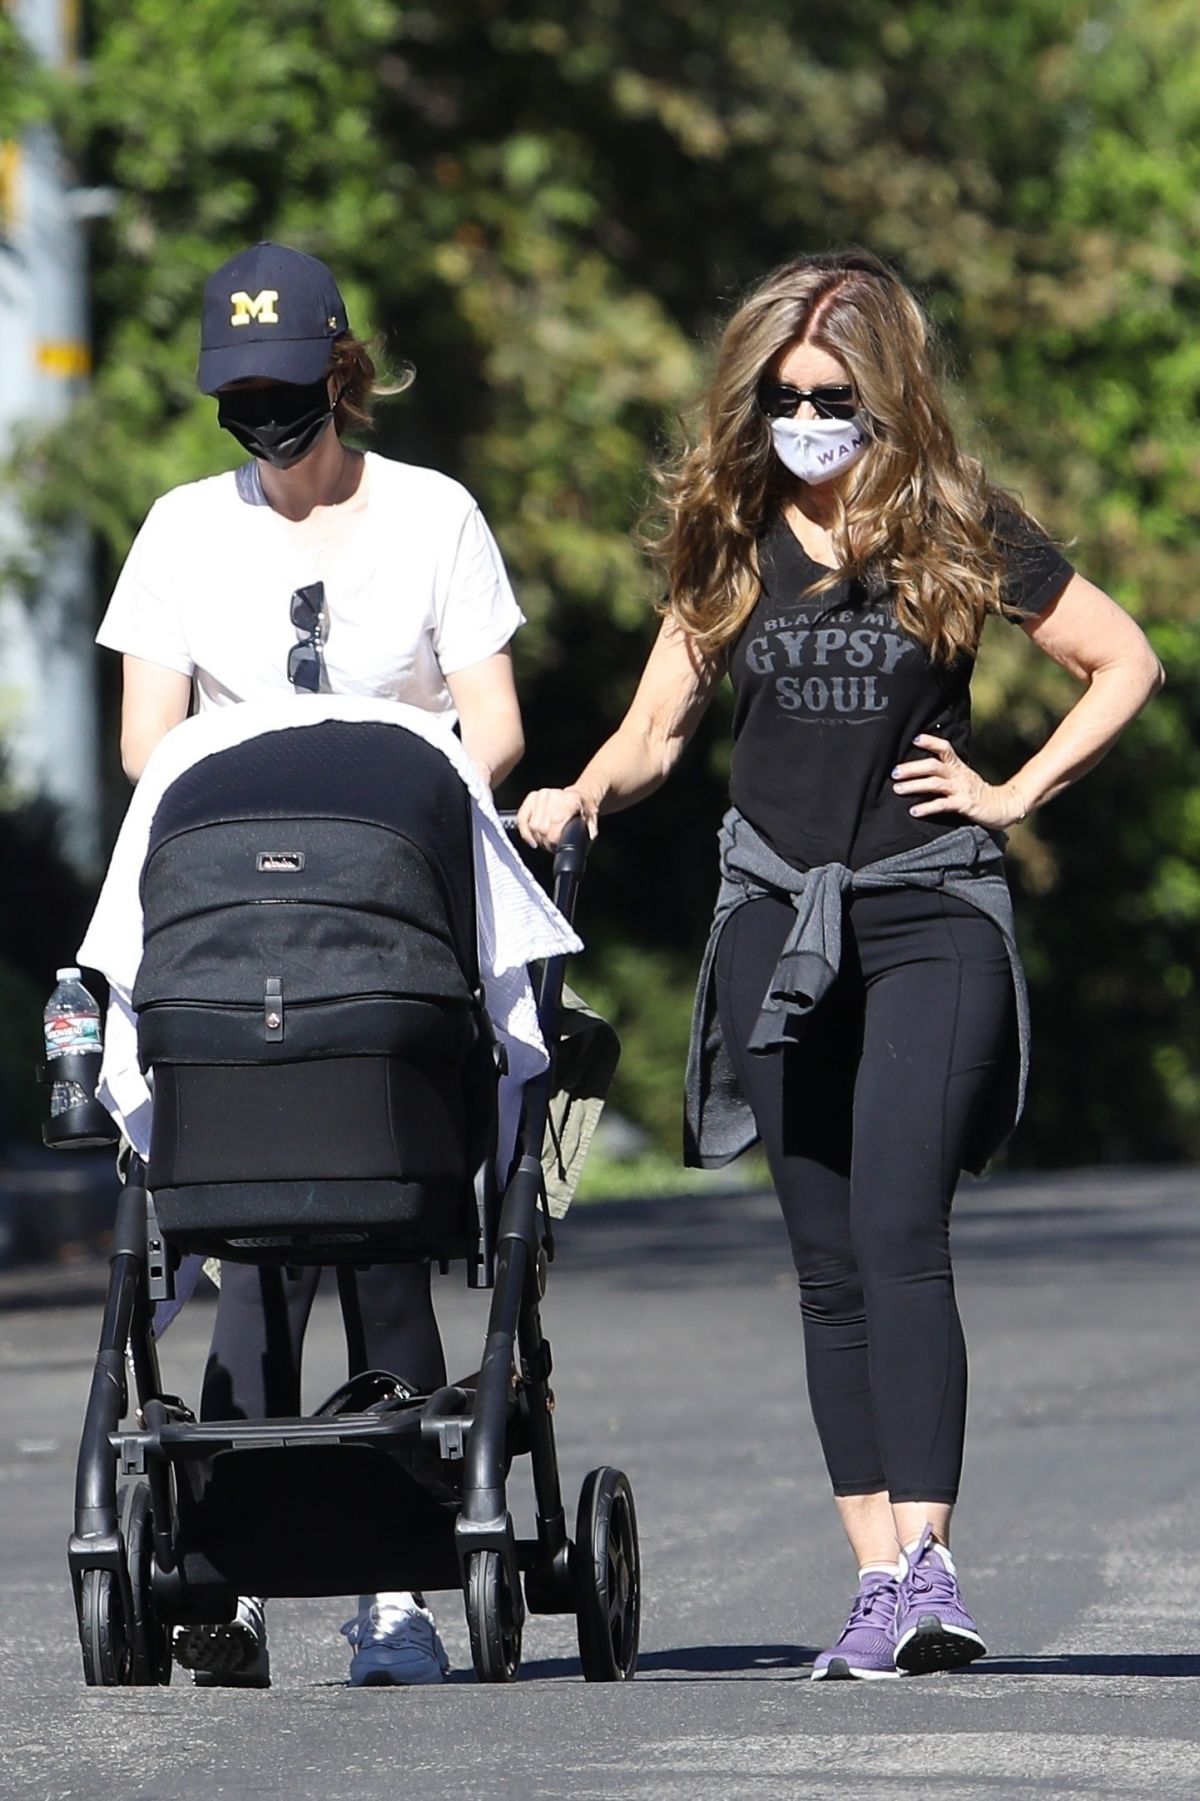 katherine-schwarzenegger-and-maria-shriver-out-in-brentwood-11-15-2020-4.jpg